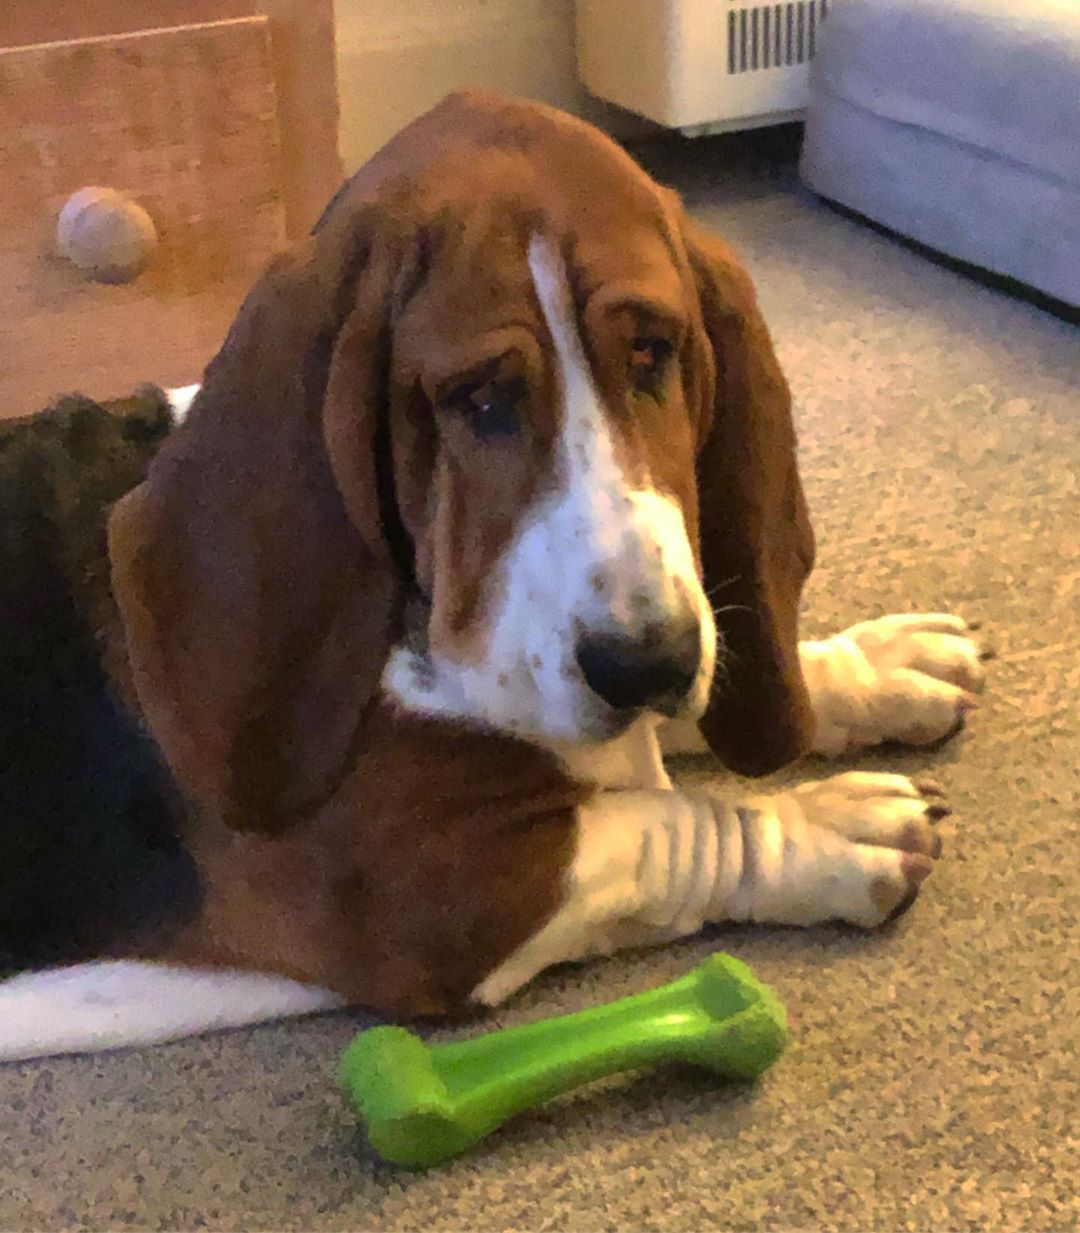 A Basset Hound lying down on the floor next to a chew bone toy